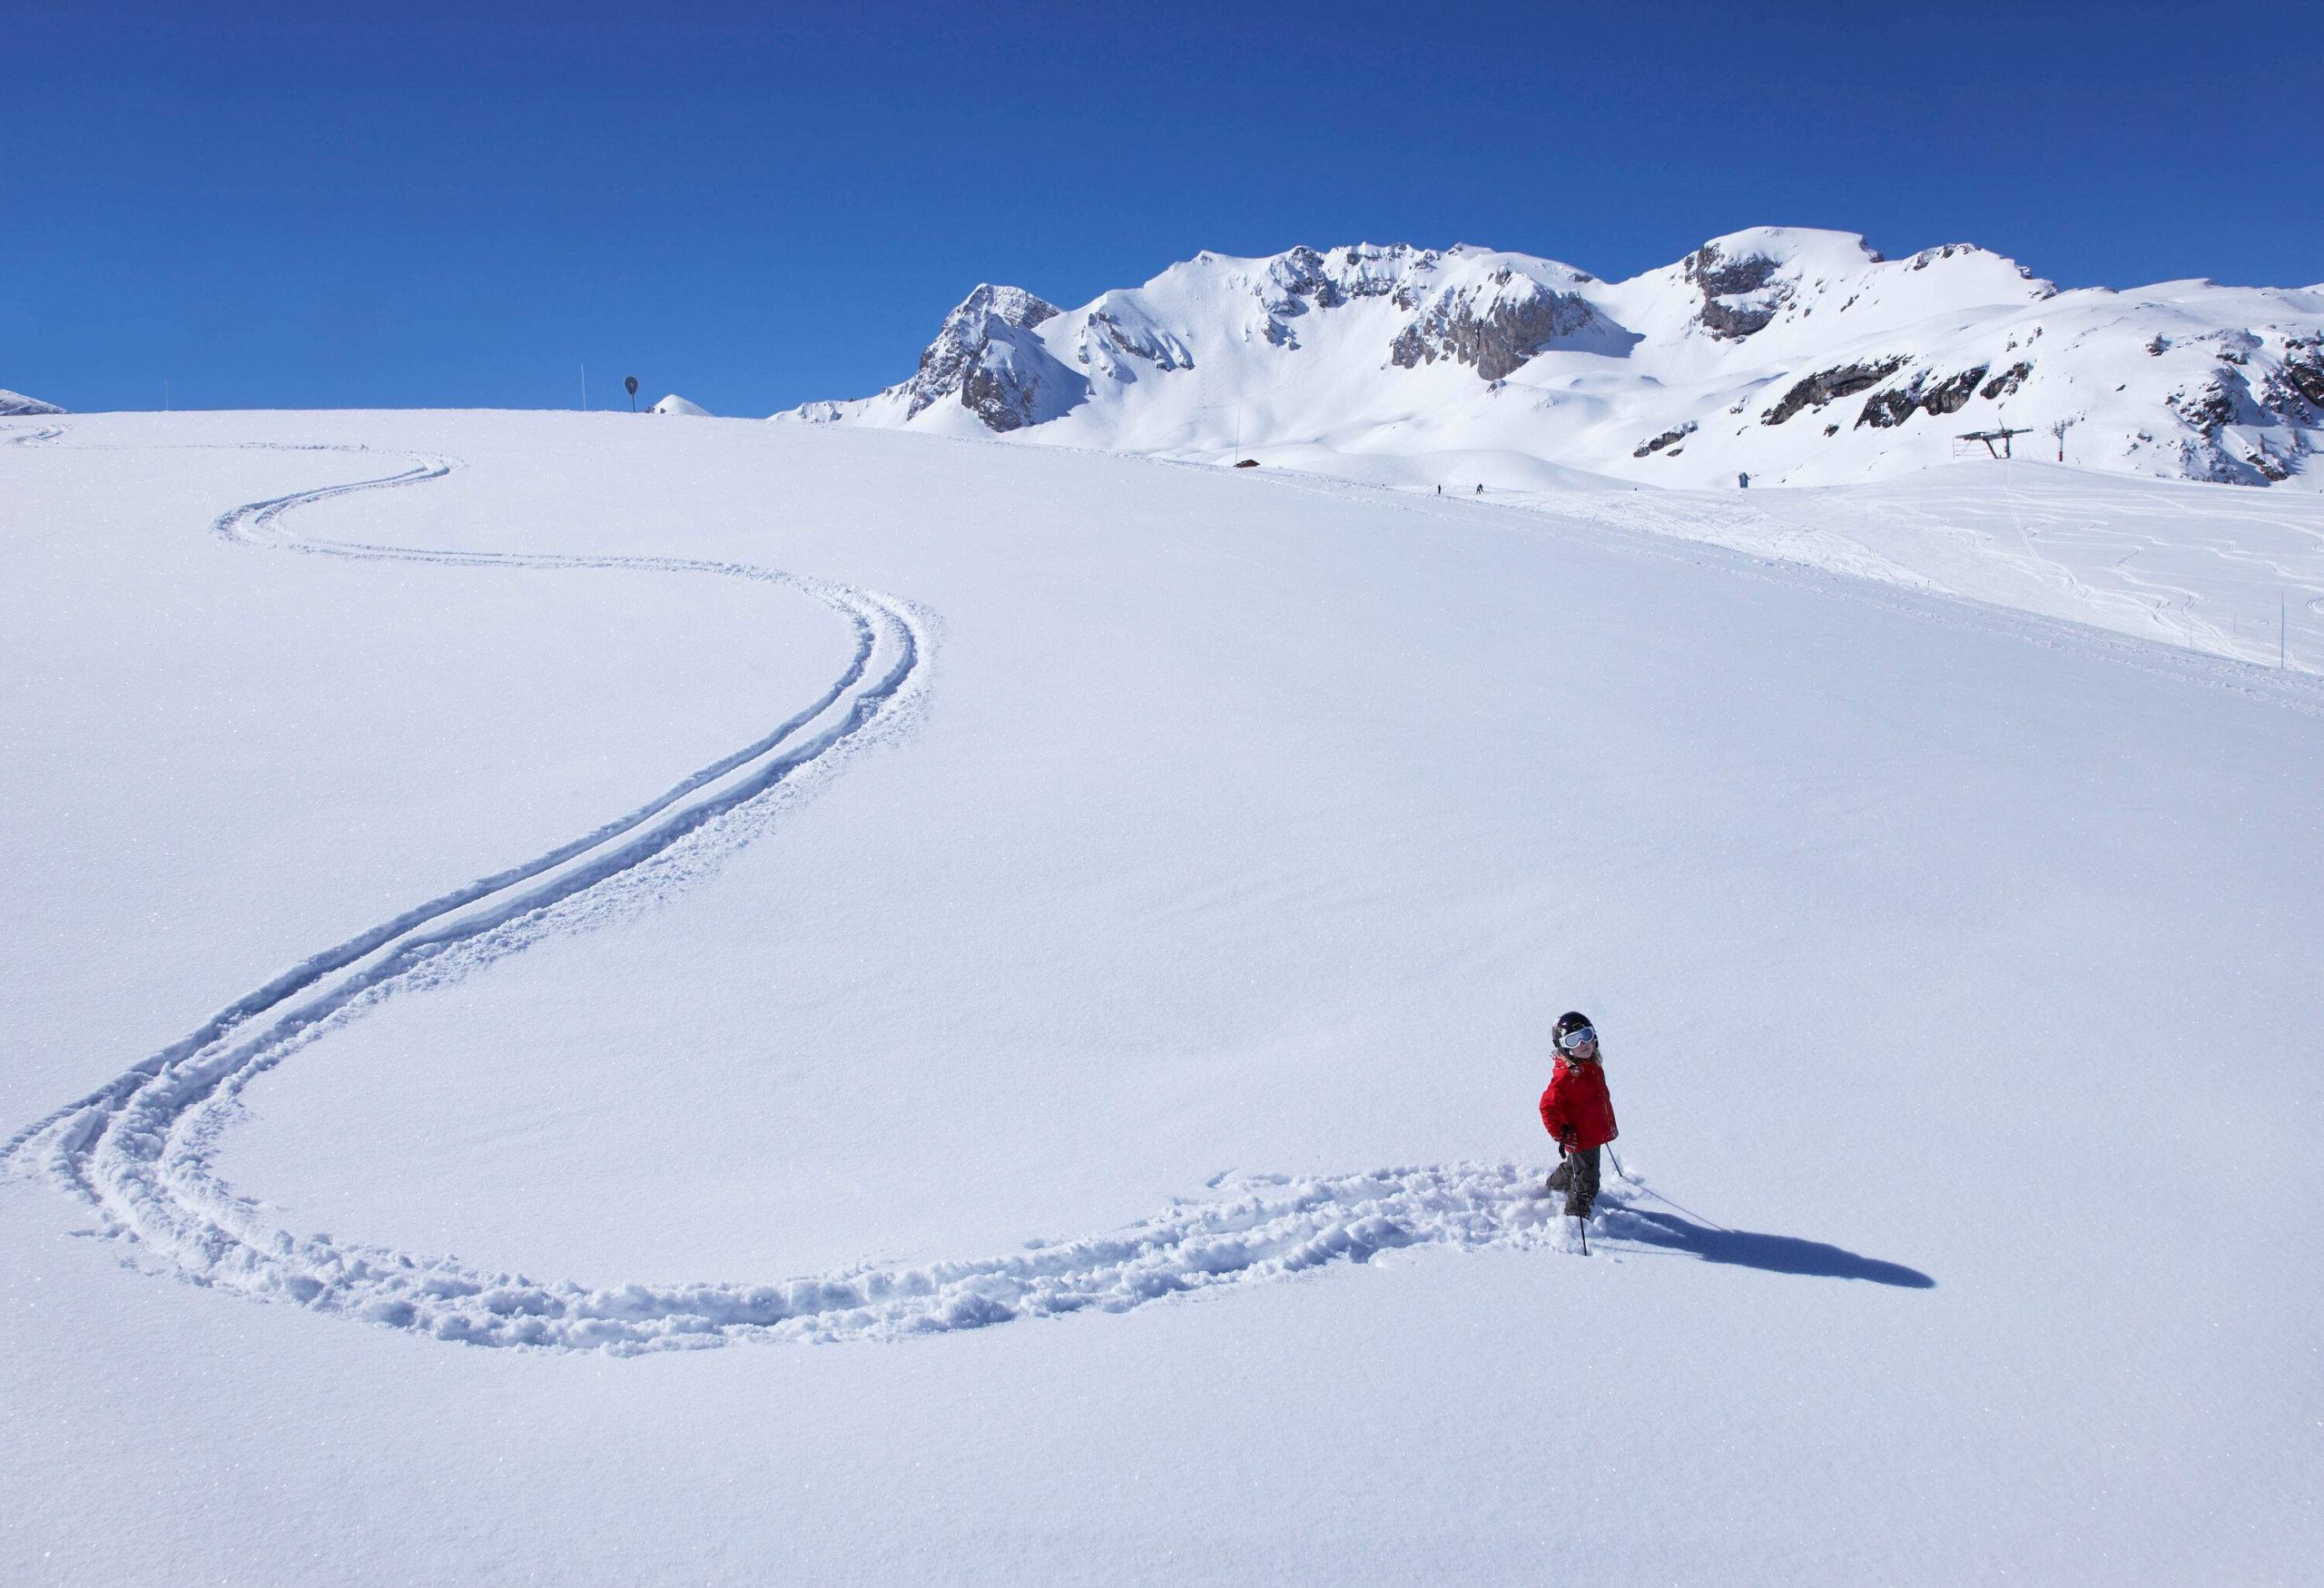 A skier glides over the snow creating a pattern of curved lines.